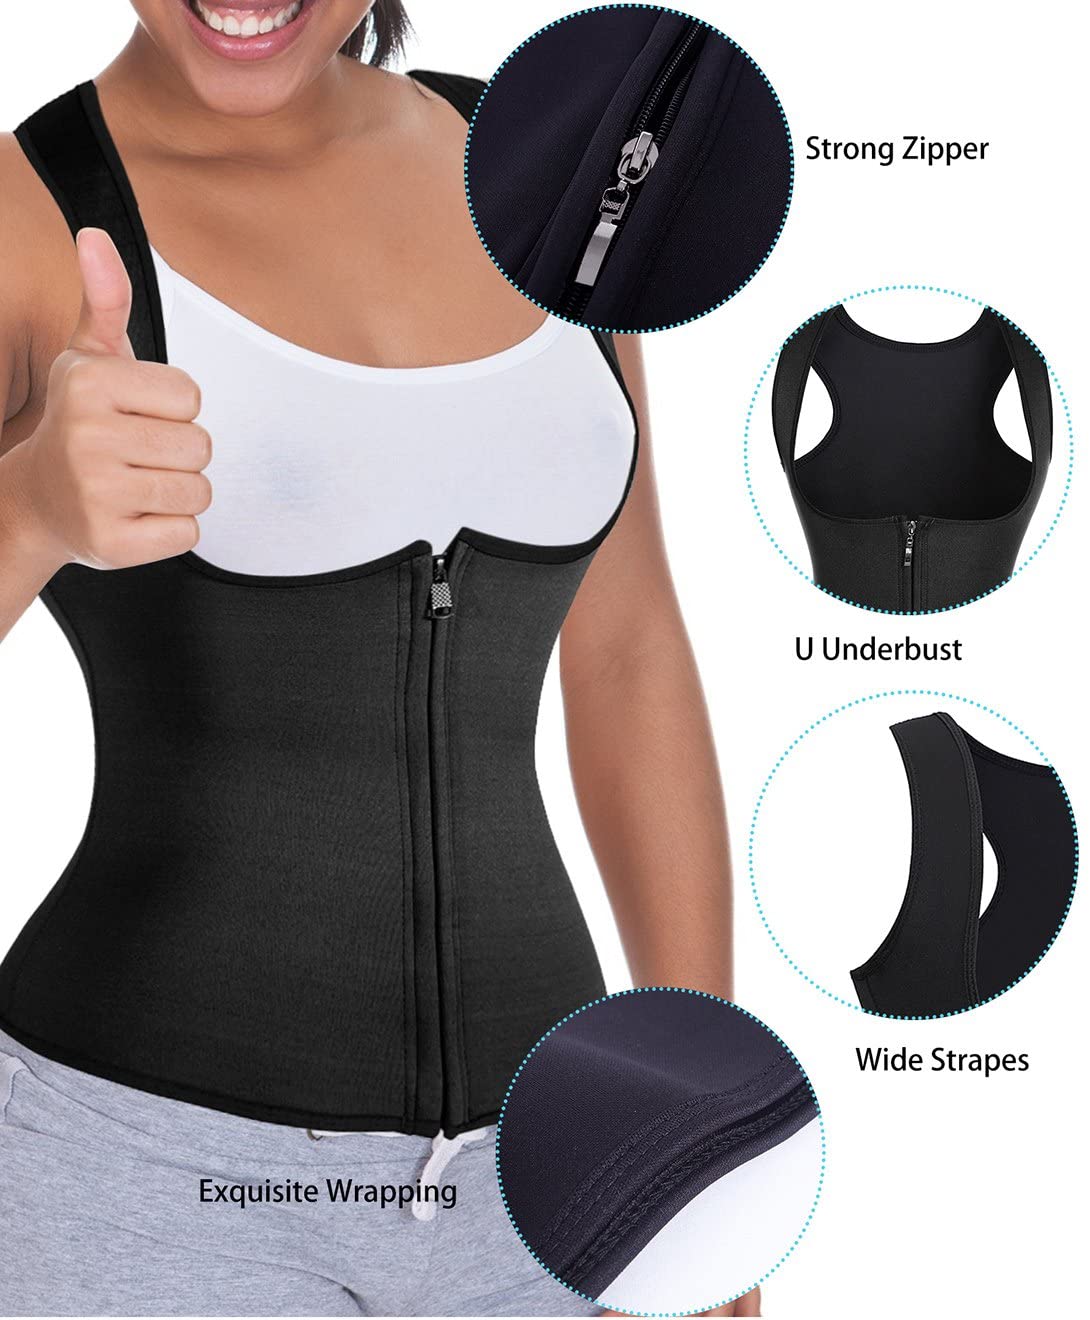 Waist Trainer Corset for Weight Loss for Waist Slimming/Reducing